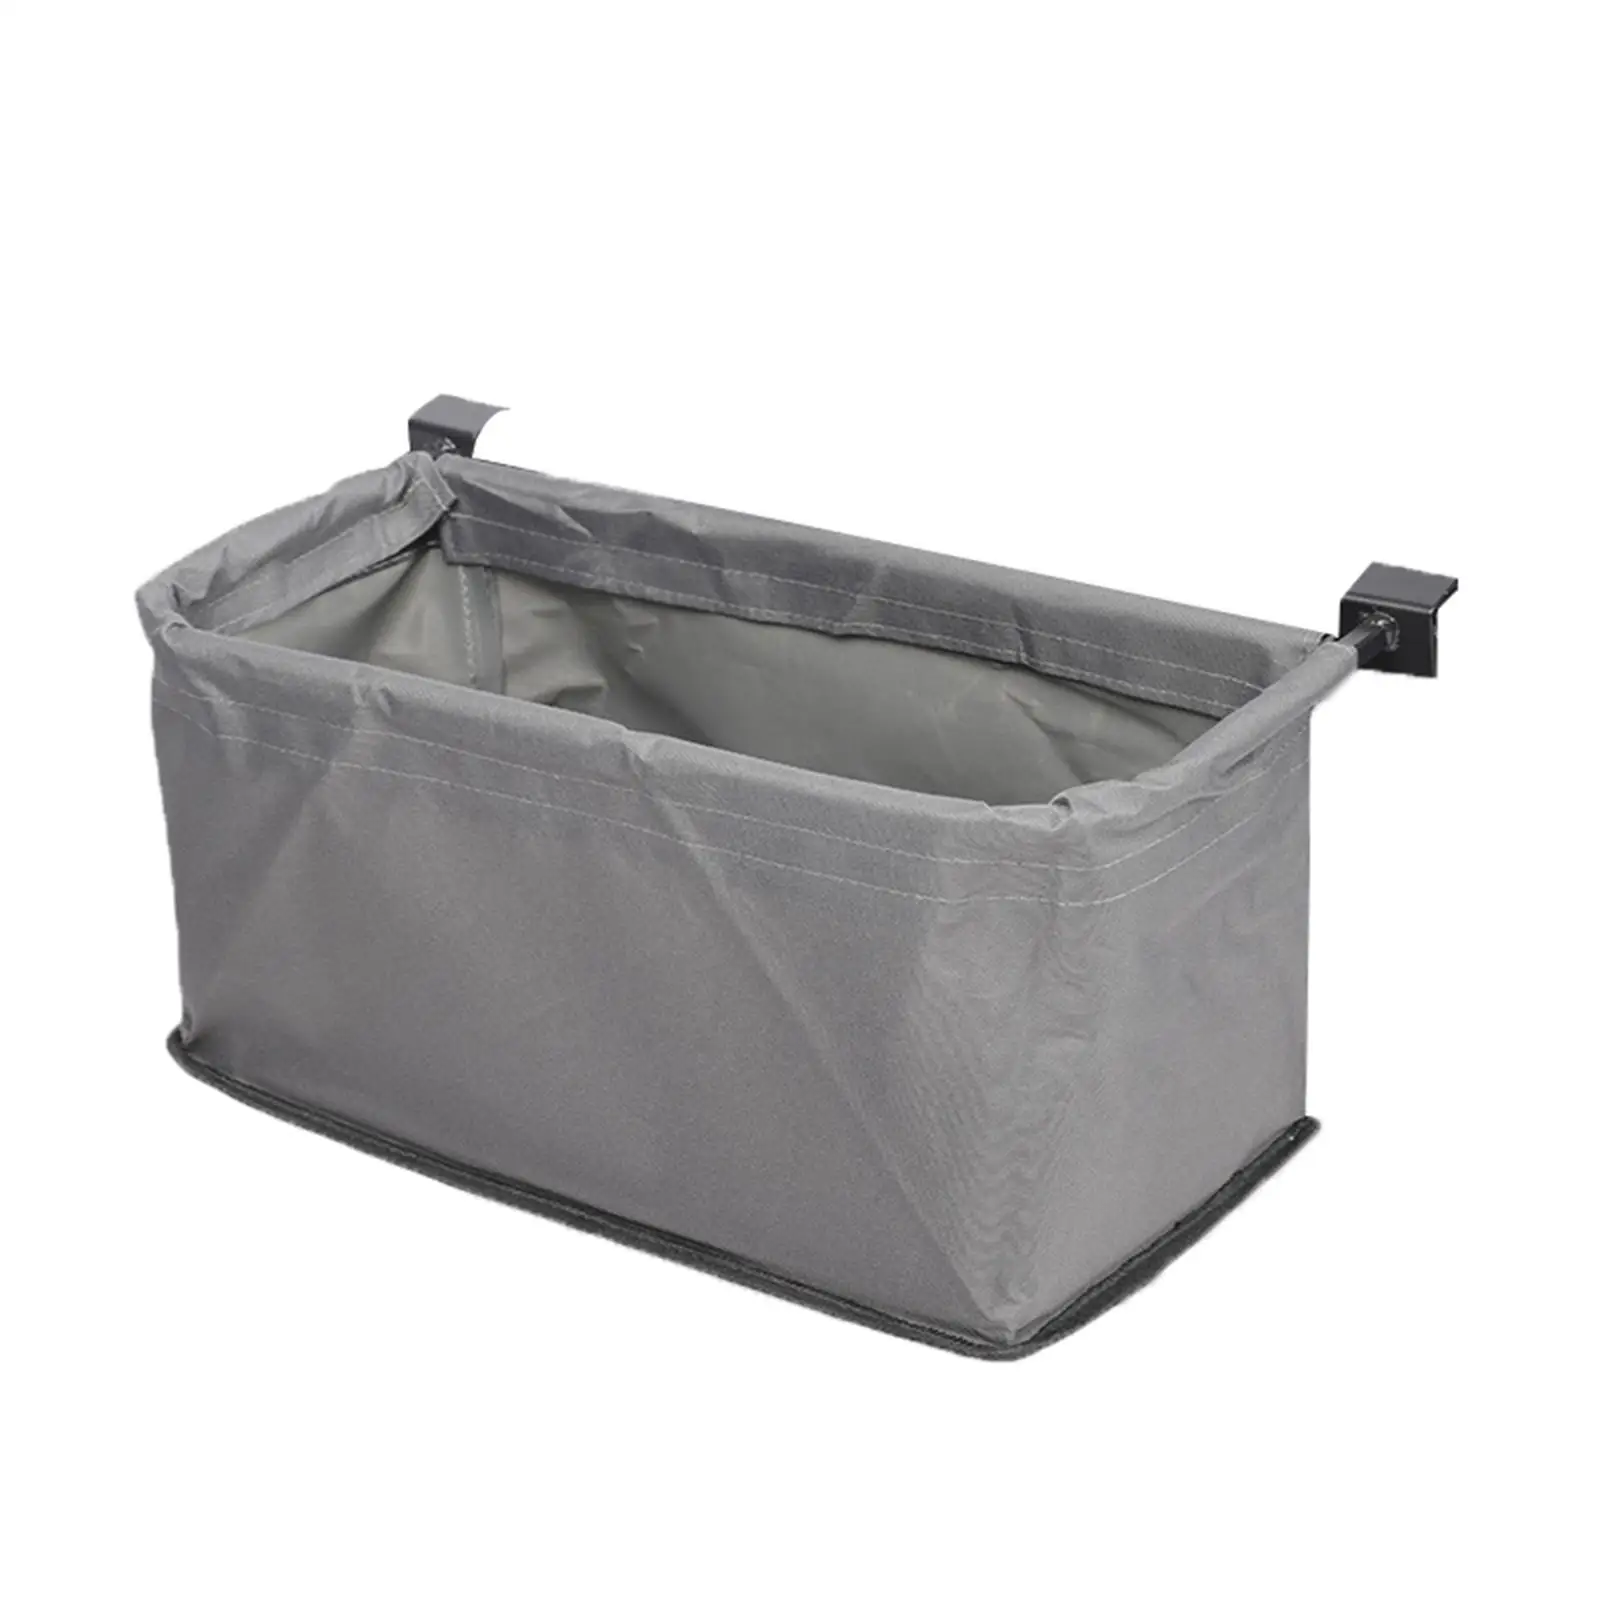 Utility Folding Cart Tail Bag Hand Push Pull Cart Basket Oxford Cloth Trolley Accessories for Garden Picnic